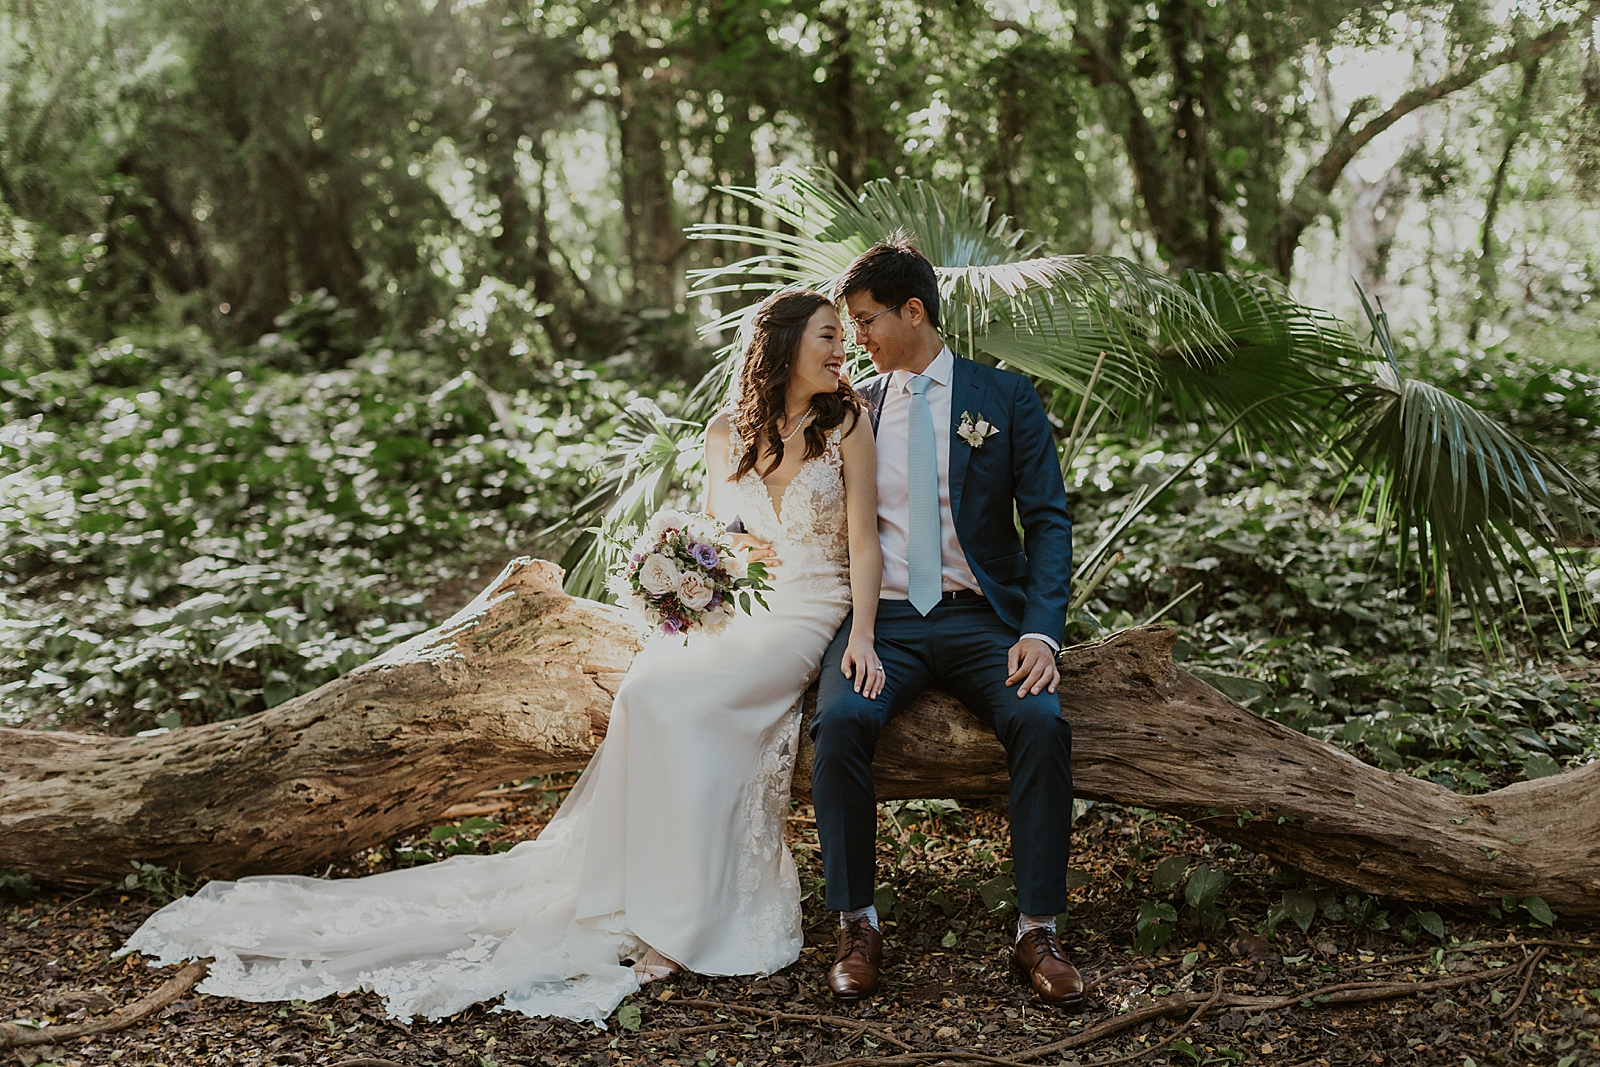 Bride and Groom sitting on fallen tree log in the forest